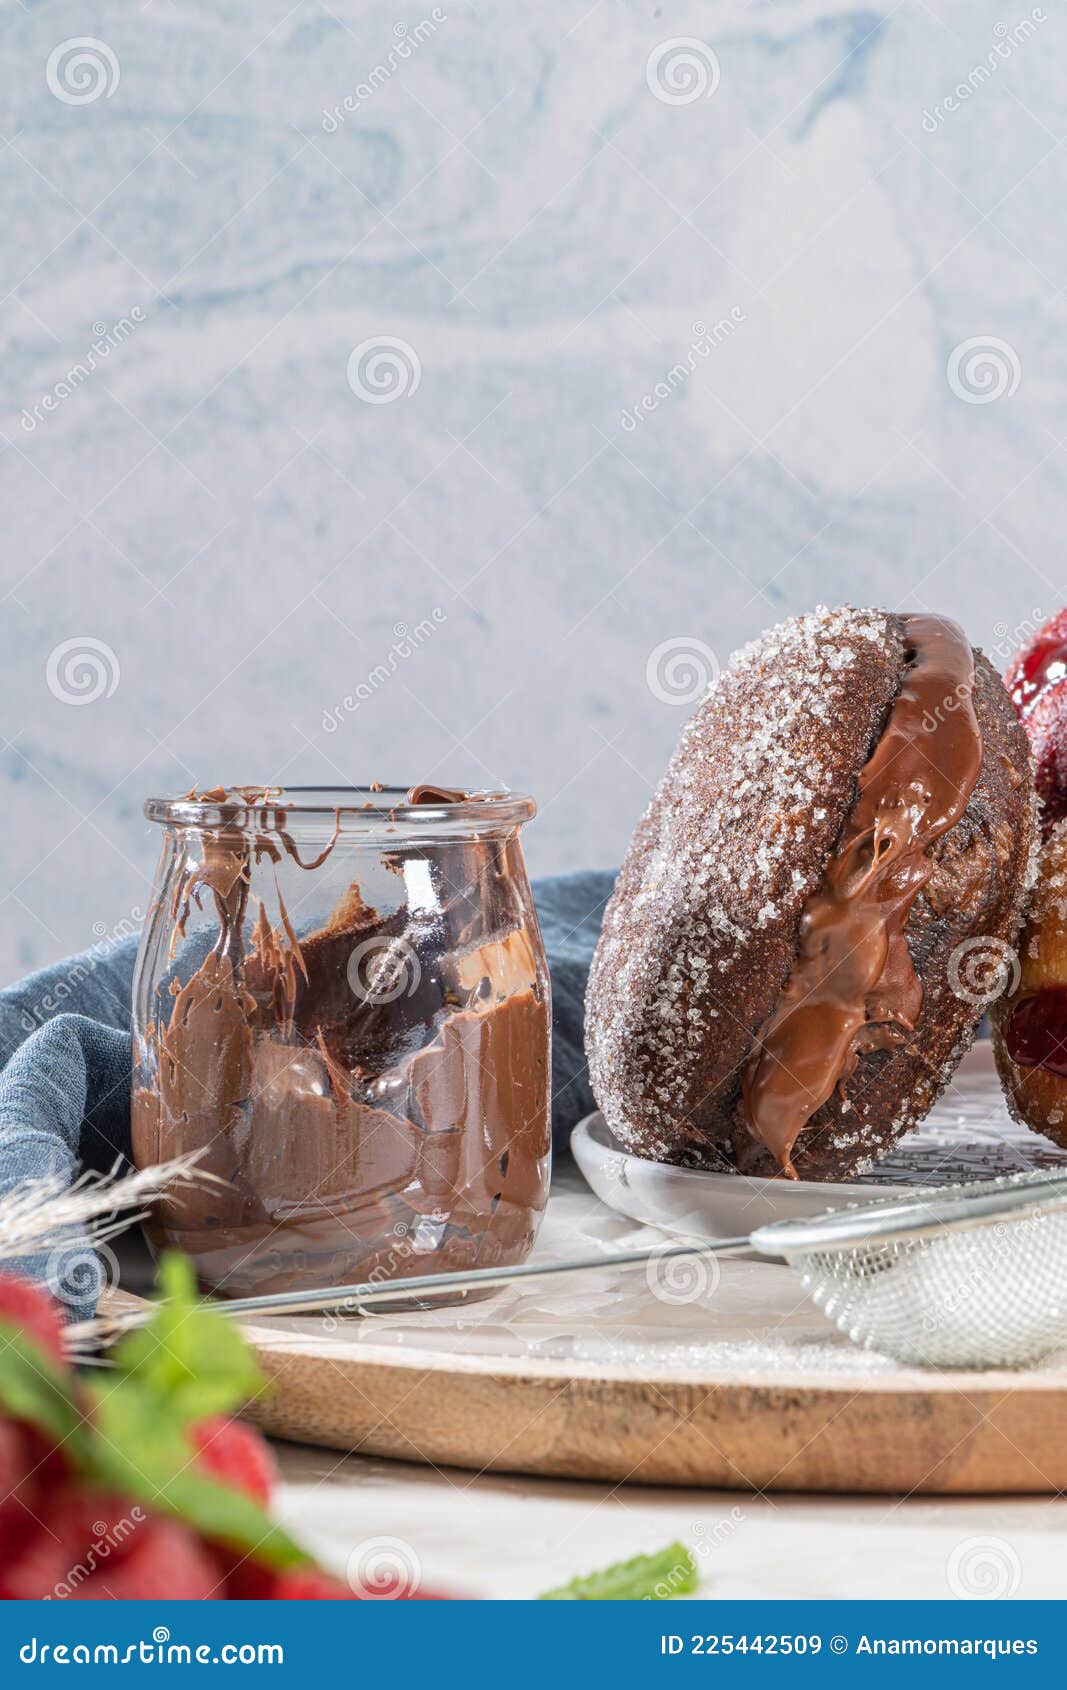 bolas de berlim, or `berlin balls`. portuguese fried dough with sugar, filled with chocolate or raspberry jam. portuguese fried